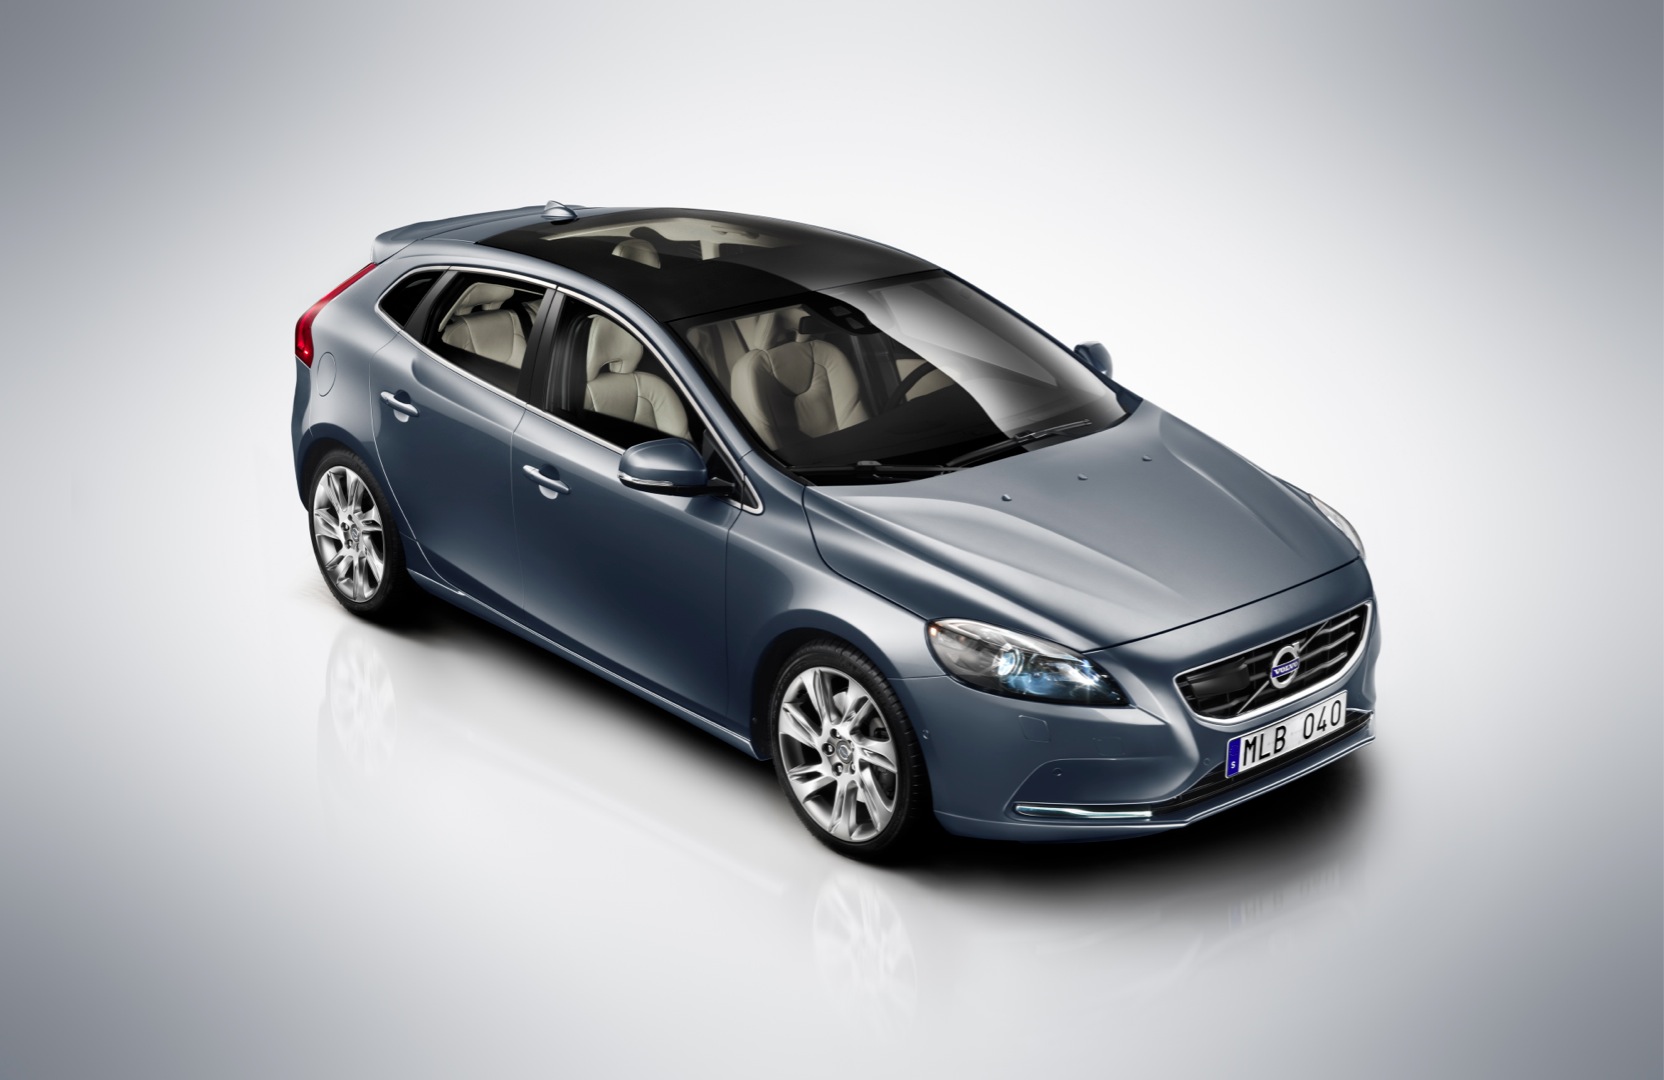 Fichiers Tuning Haute Qualité Volvo V40 / V40 Cross Country 1.6 T3 150hp